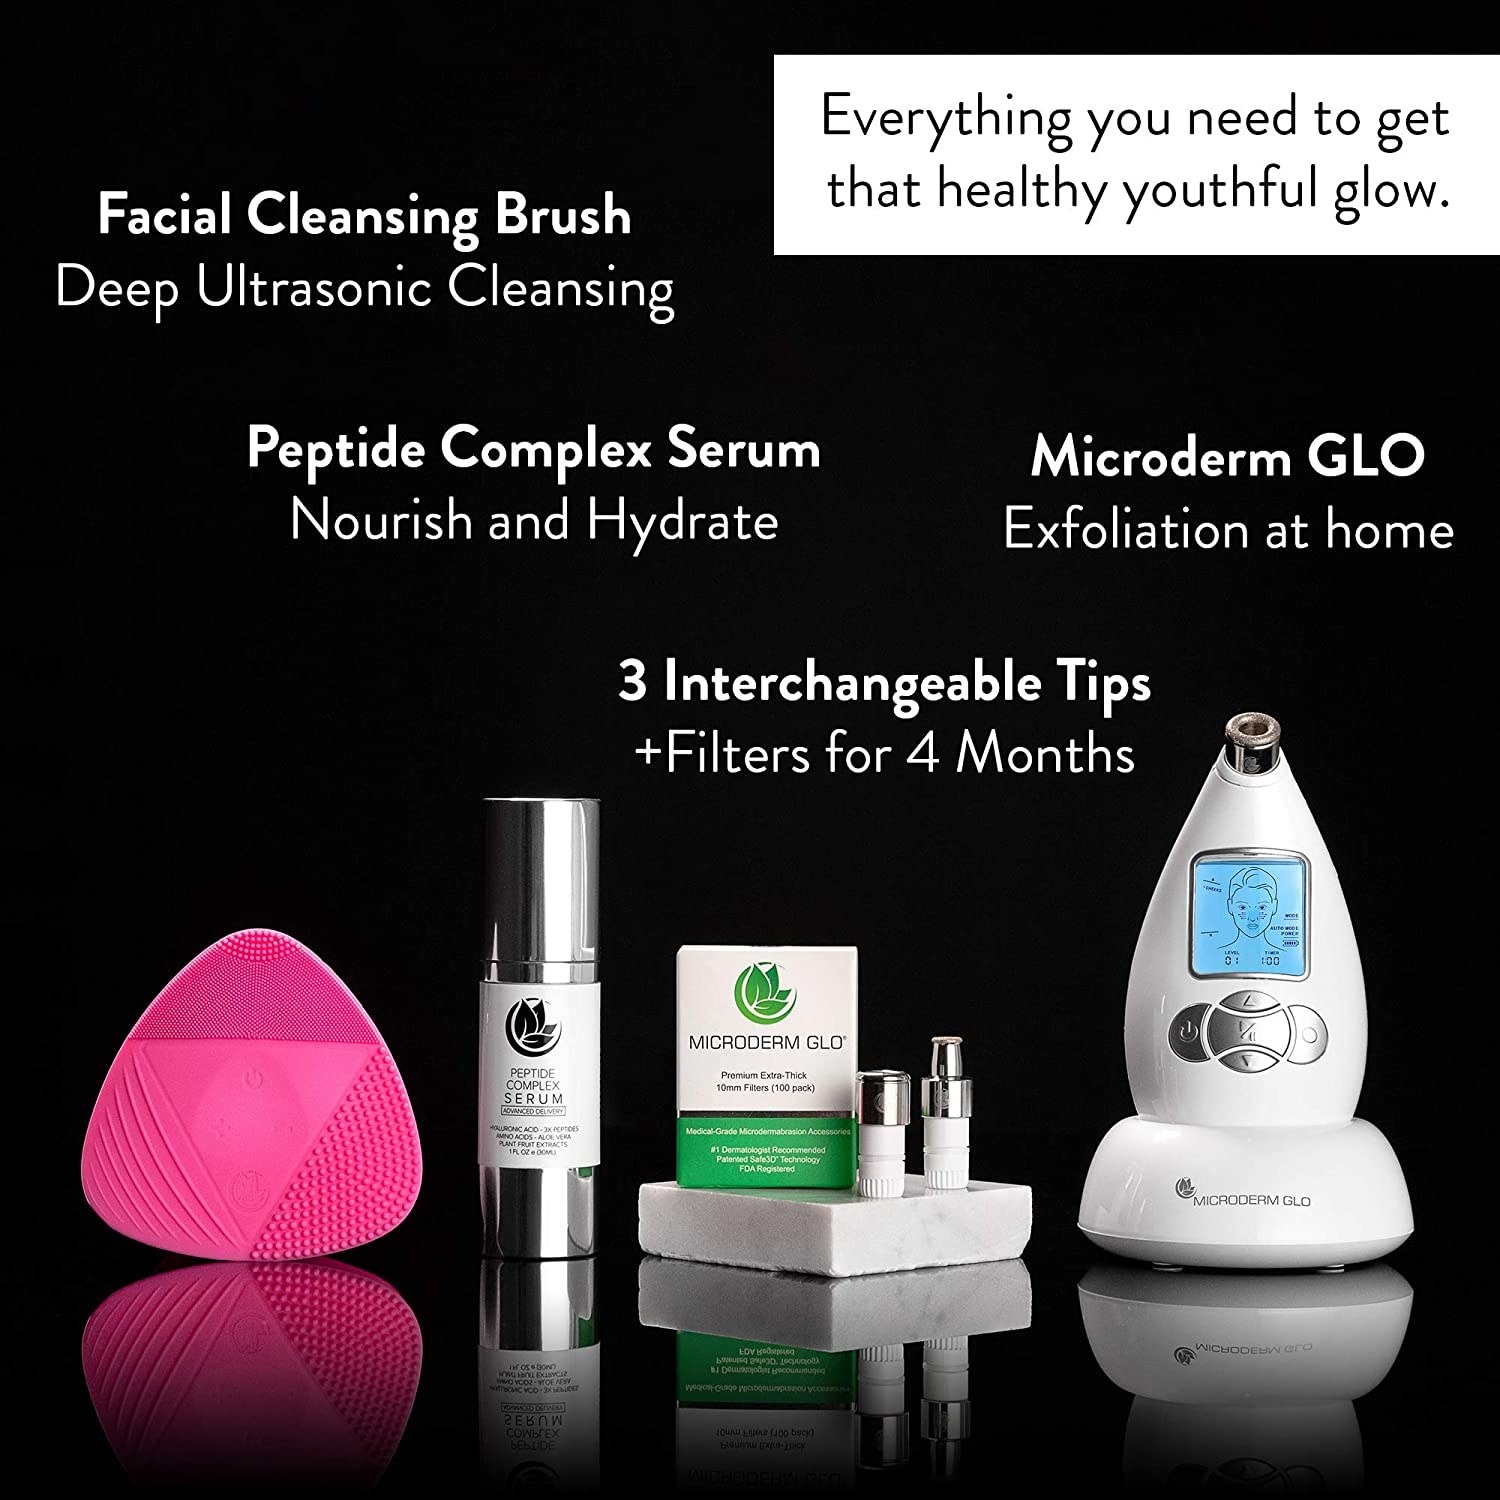 The content of the kits: the cleaning brush, peptide serum, three interchangeable tips, and the Microderm GLO microneedling tool